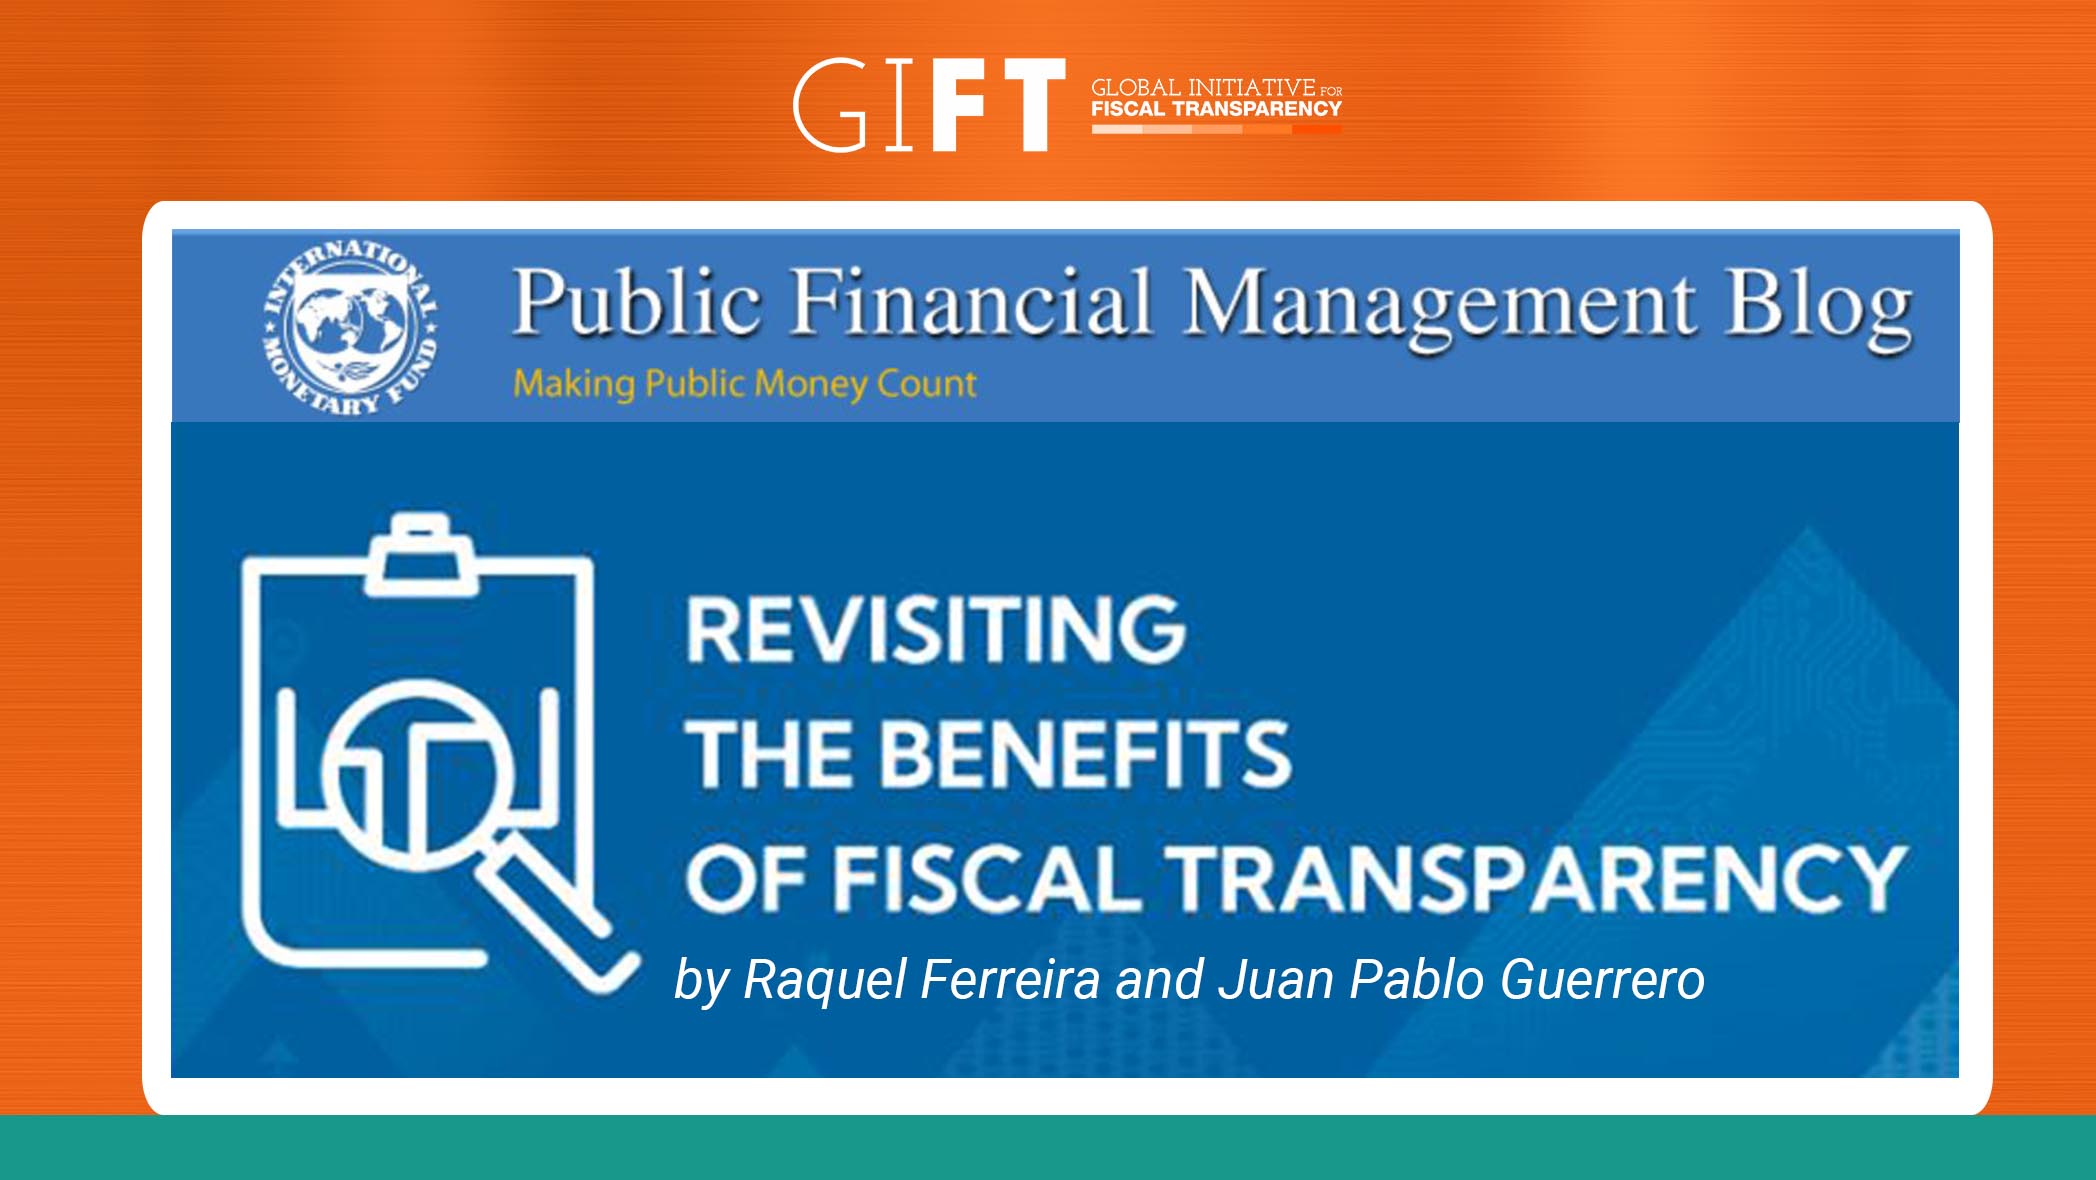 Revisiting benefits of fiscal transparency